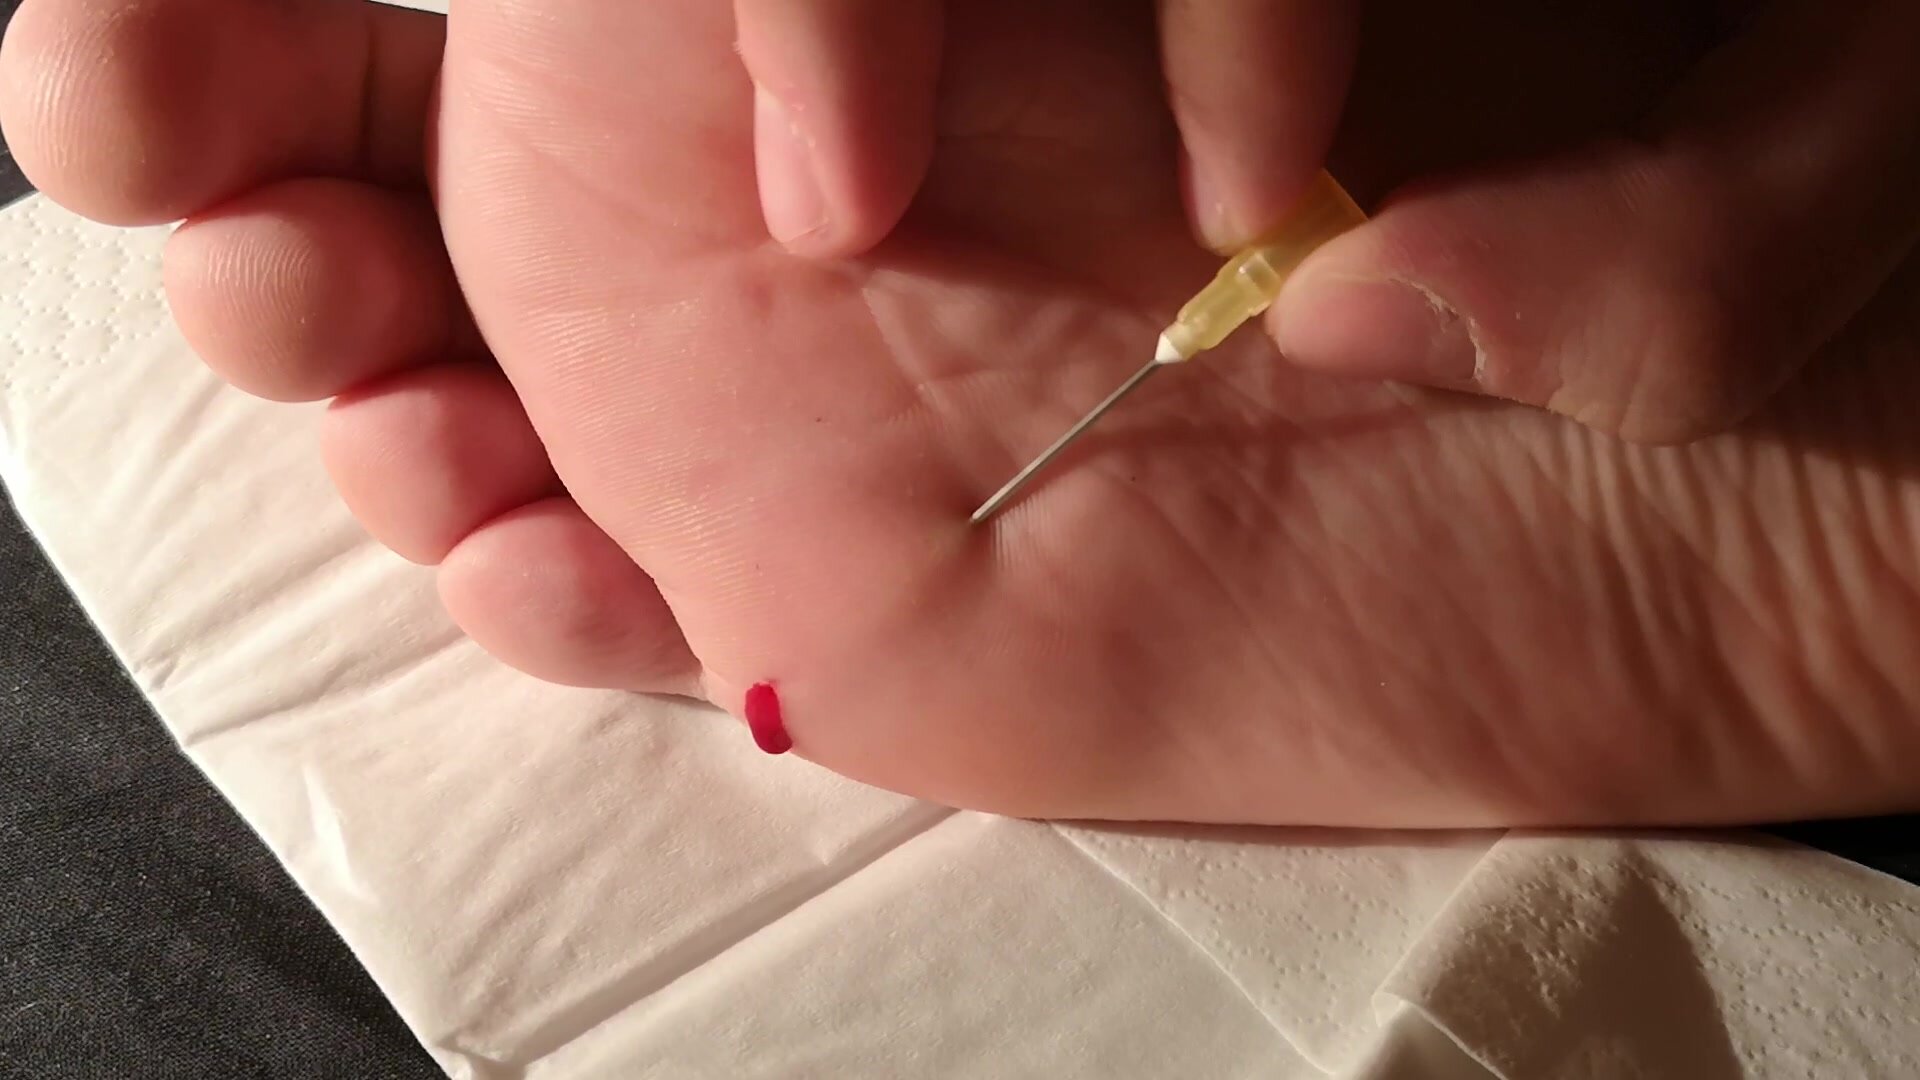 Removing needle from male foot